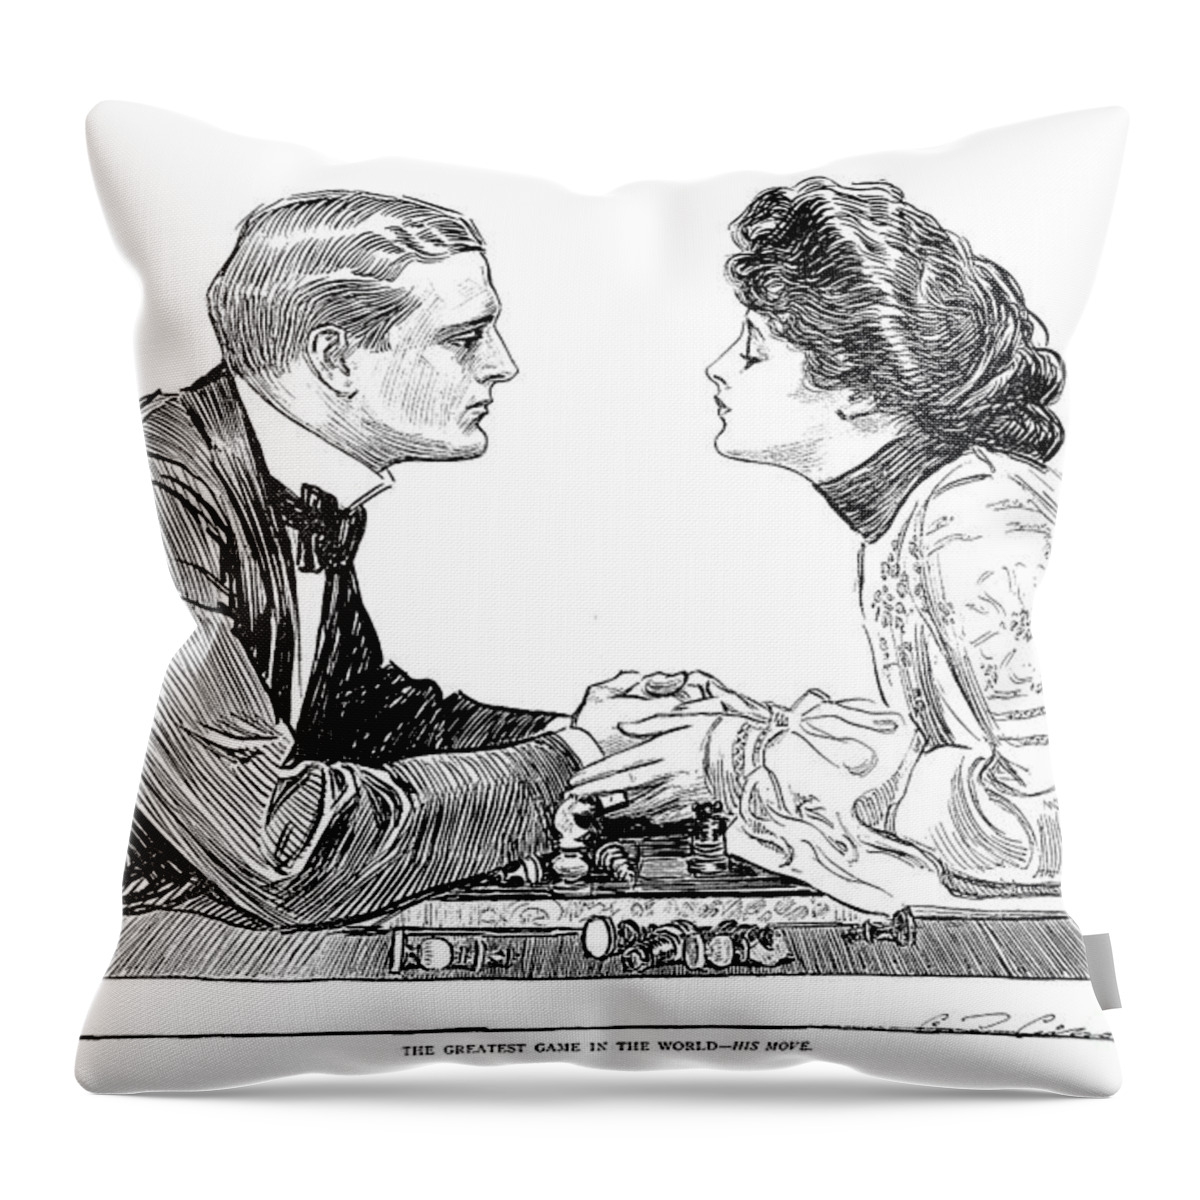 1903 Throw Pillow featuring the photograph Chess Game, 1903 by Charles Dana Gibson